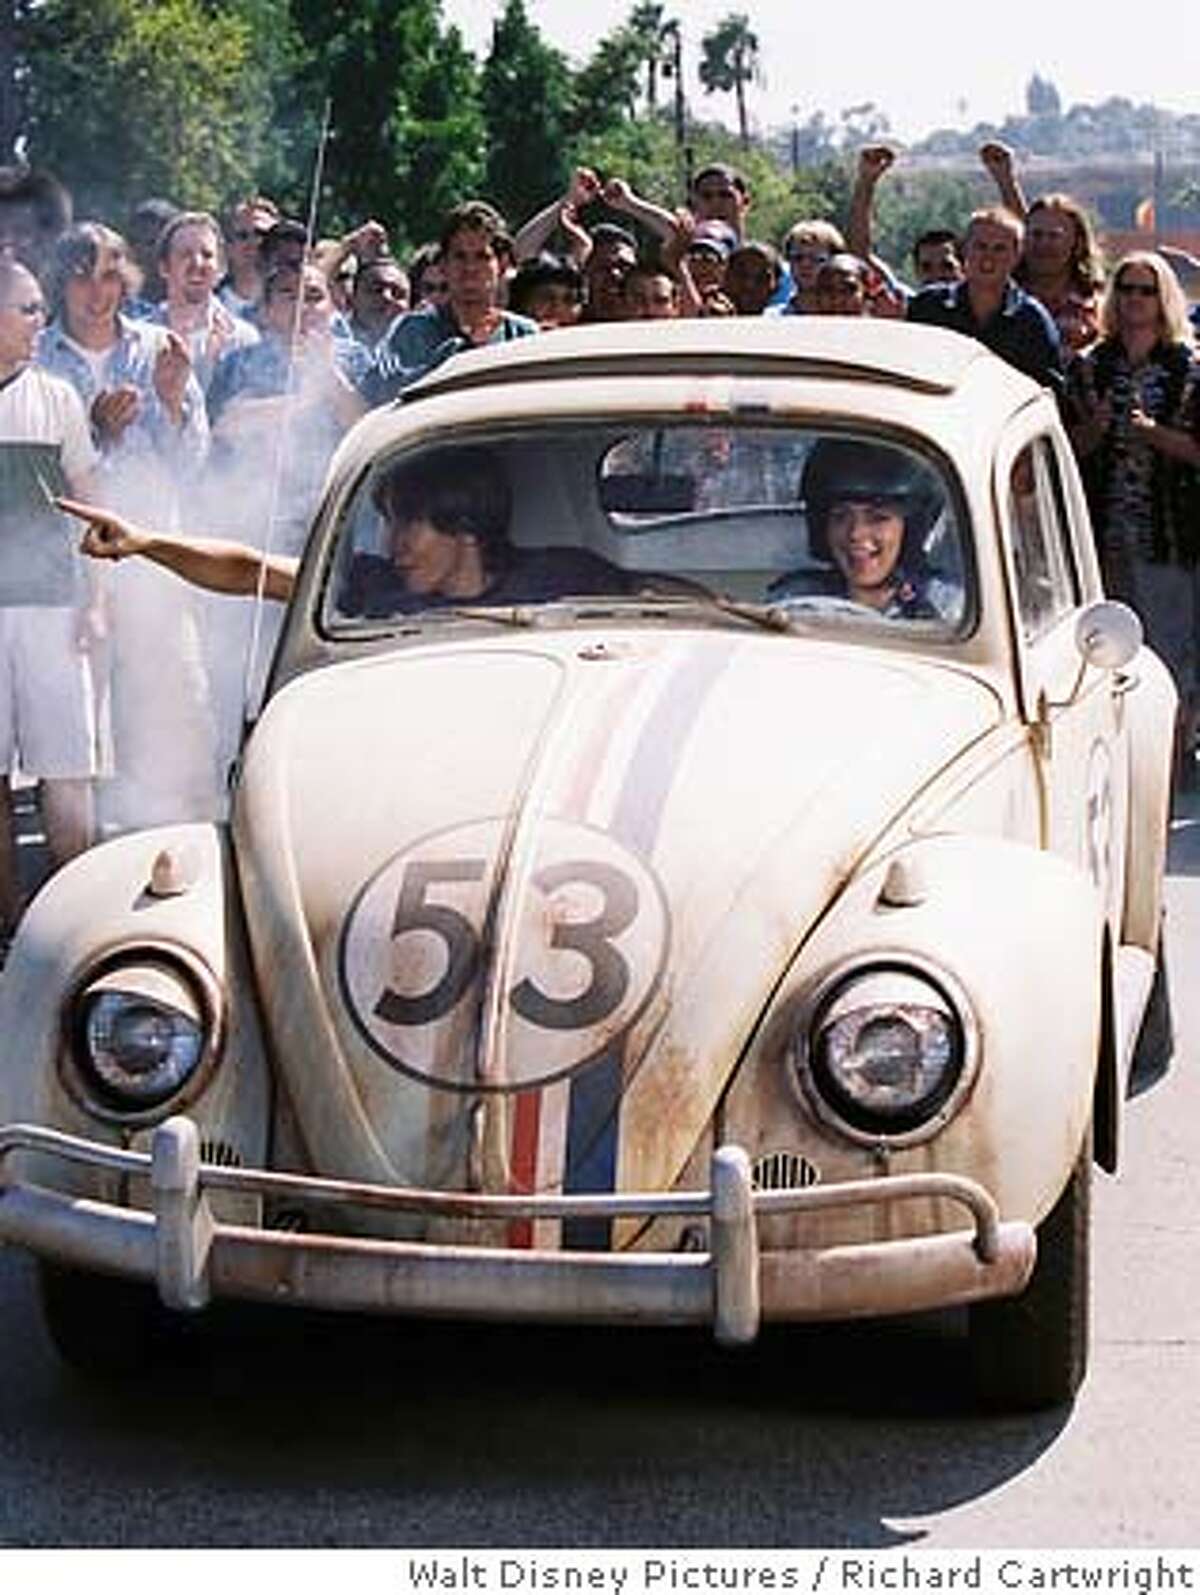 In this photo provided by Walt Disney Pictures, Justin Long (left), Lindsay Lohan (right) takes a ride in Herbie, a Volkswagen Bug that can drive itself, in 'Herbie Fully Loaded' (AP Photo/Walt Disney Pictures/ Richard Cartwright)